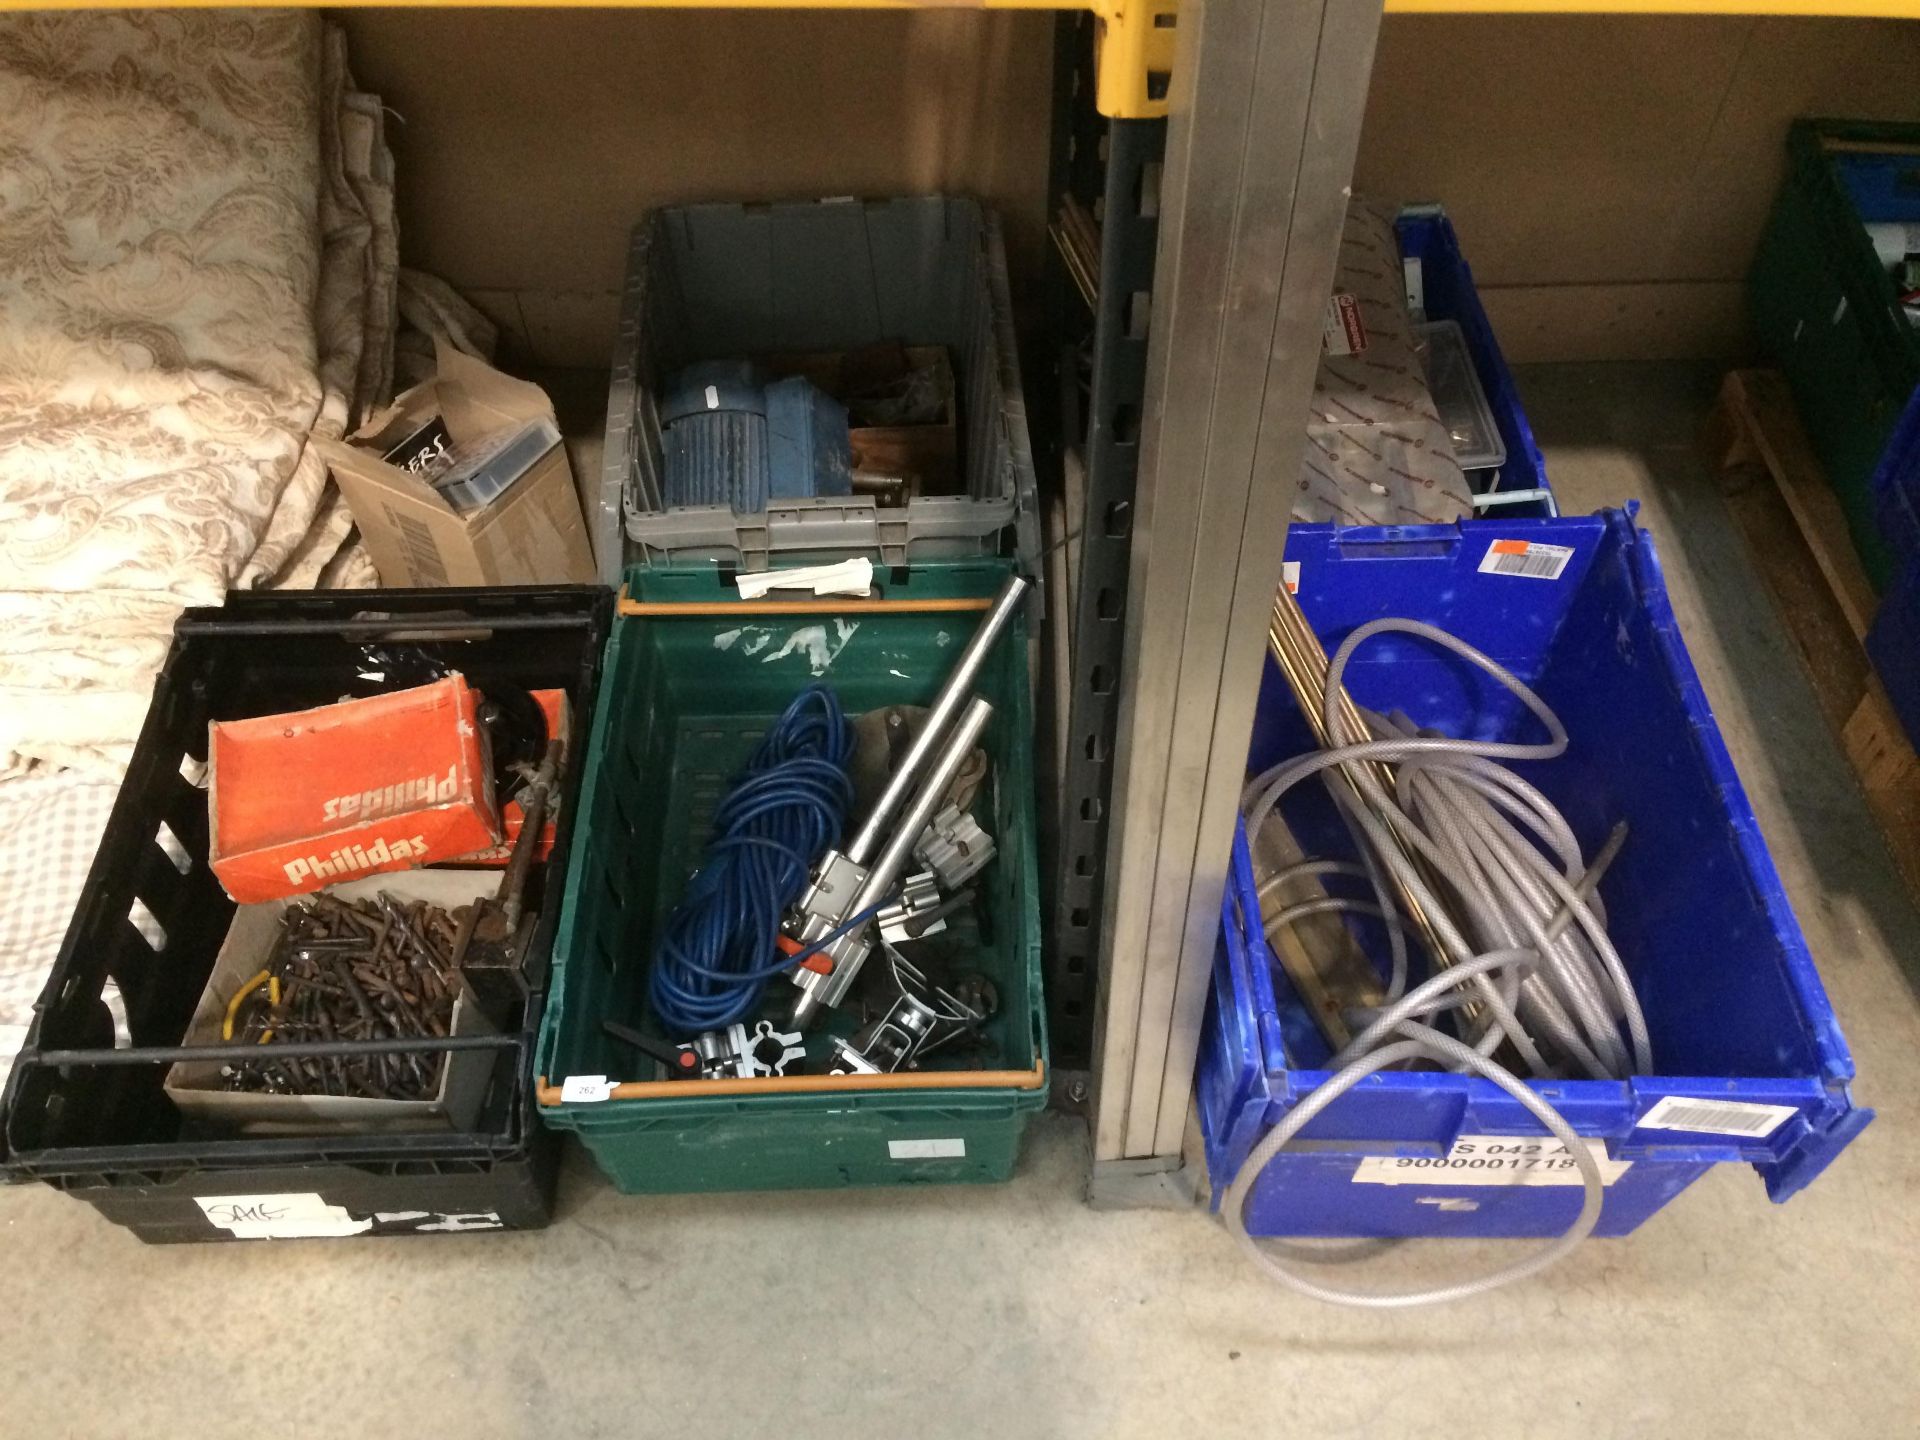 Contents to five boxes - large quantity of large drill bits, Festo fittings, motor,